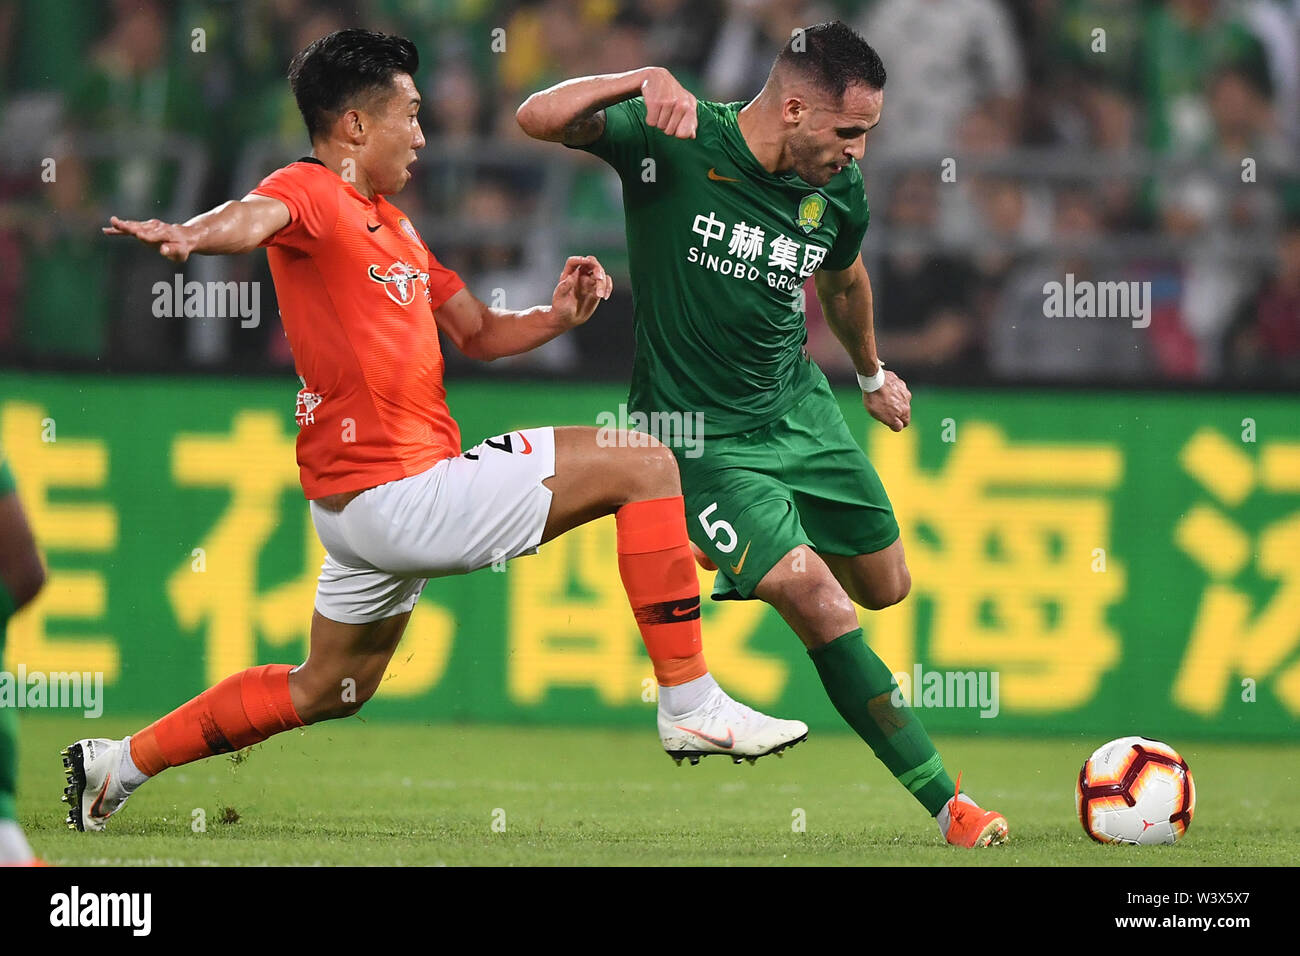 Brazilian football player Renato Soares de Oliveira Augusto, or simply Renato Augusto, right, of Beijing Sinobo Guoan passes the ball against a player of Beijing Renhe in their 18th round match during the 2019 Chinese Football Association Super League (CSL) in Beijing, China, 17 July 2019. Beijing Sinobo Guoan defeated Beijing Renhe 2-1. Stock Photo